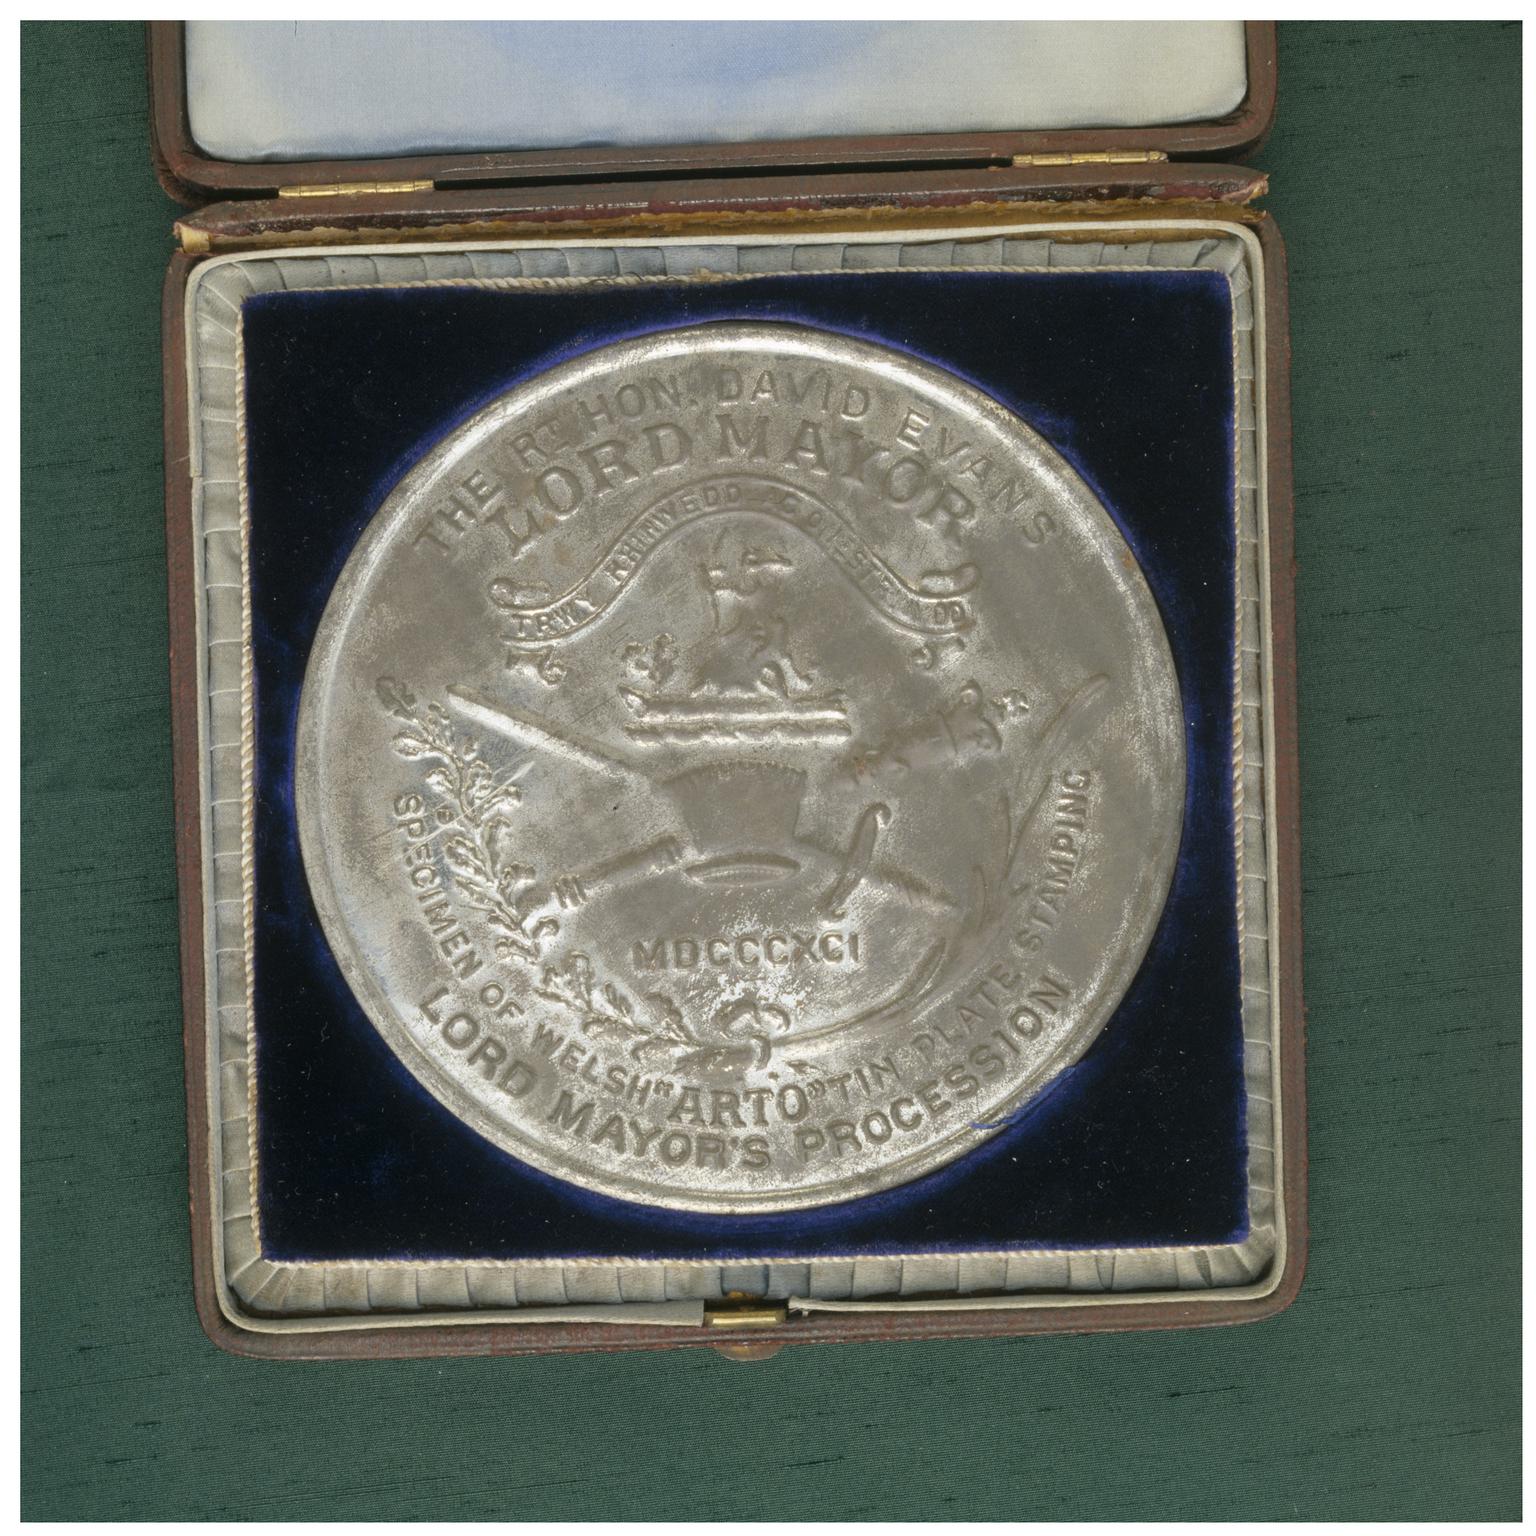 Commemorative medal. A specimen of Welsh &quot;ARTO&quot; tin plate stamping (obverse)